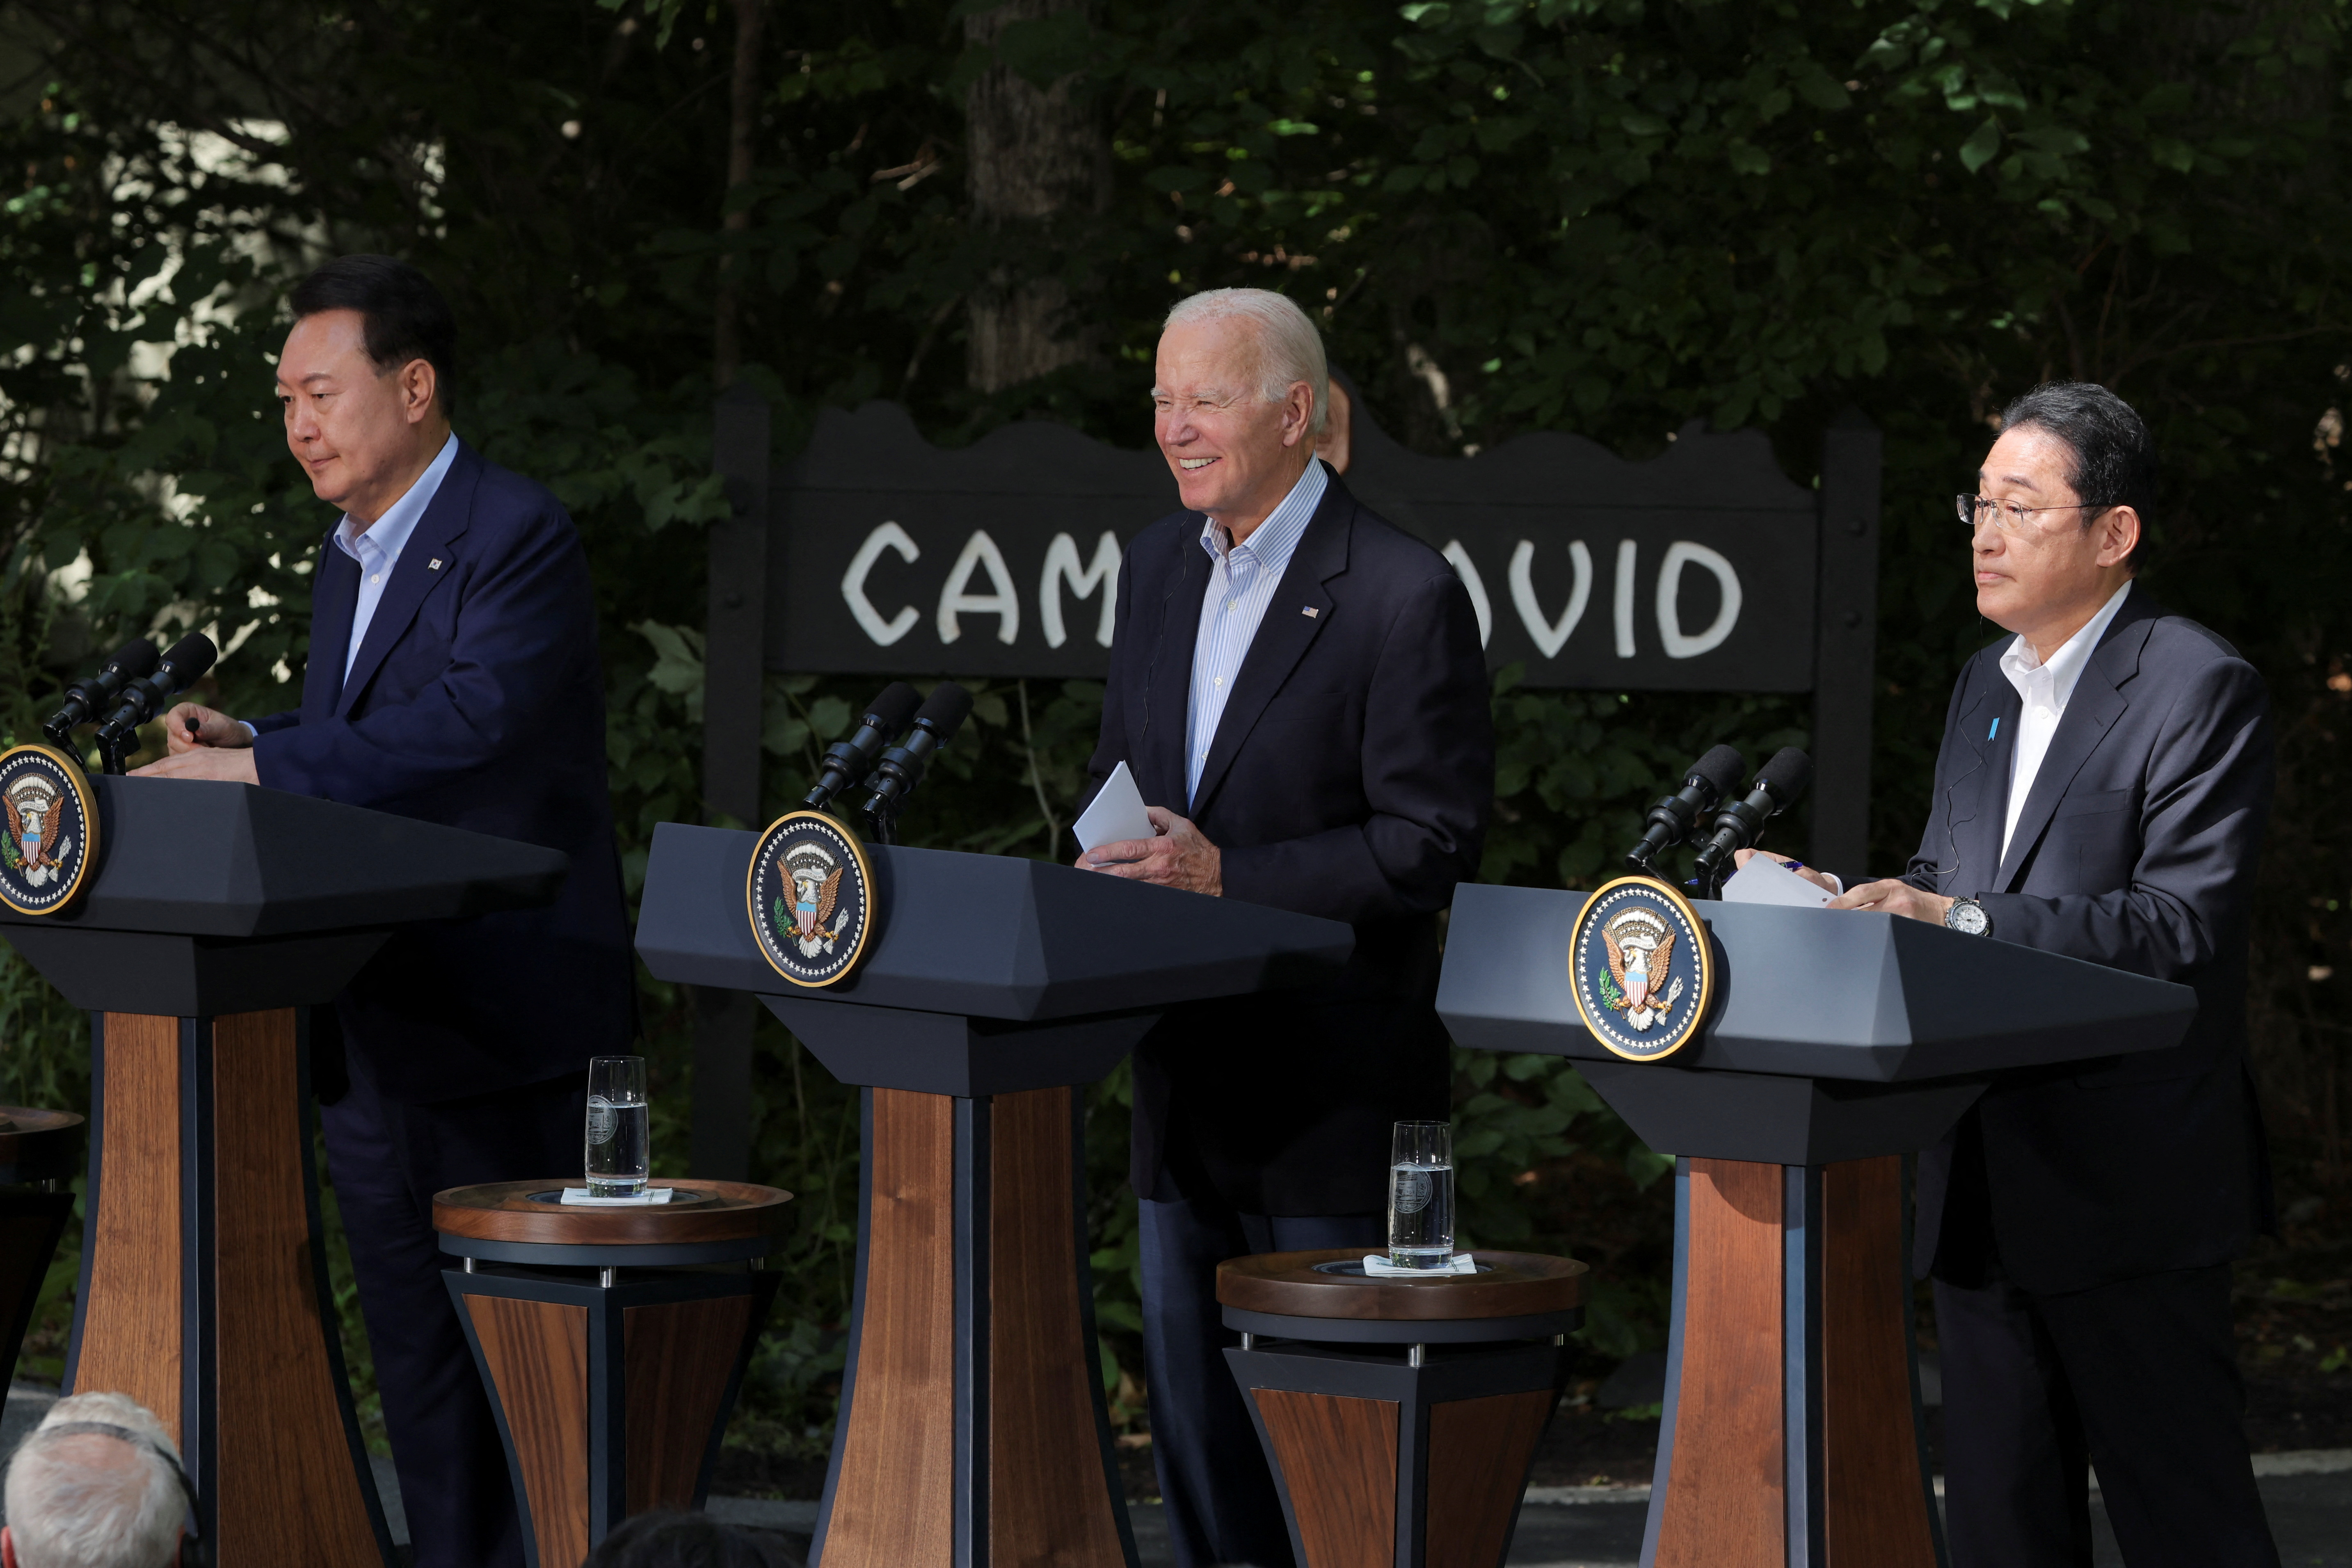 Trilateral summit at Camp David in Maryland